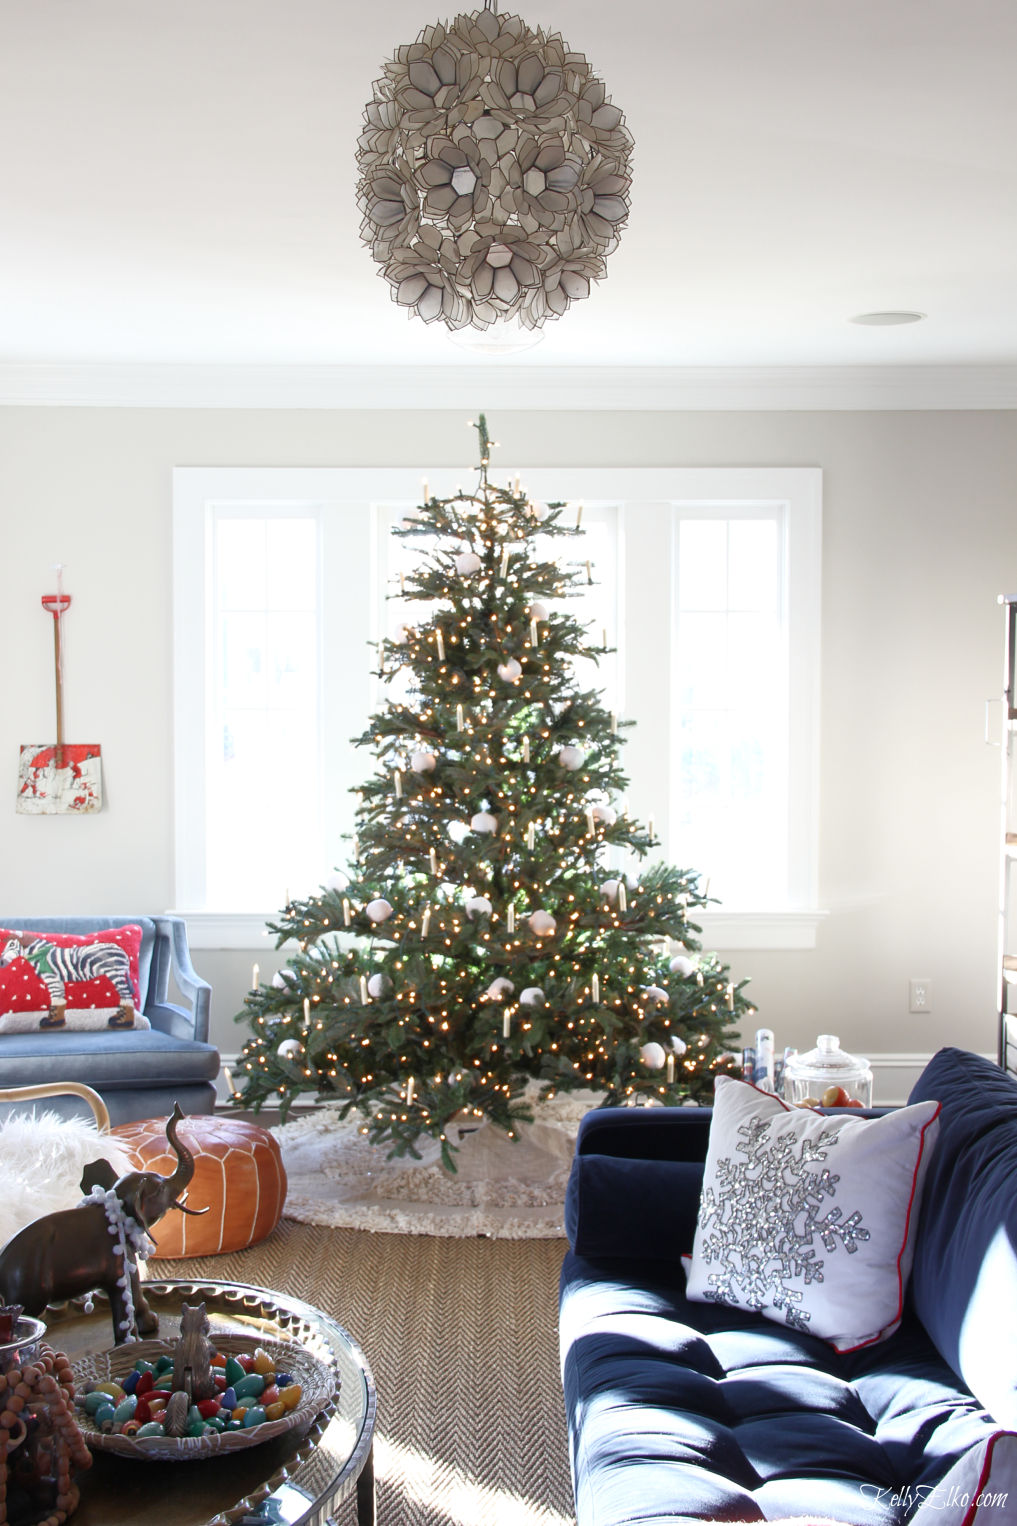 Wow - this is the most realistic Christmas tree I've ever seen! Love the candle lights and snowball ornaments kellyelko.com #christmastree #christmastrees #christmasdecor #christmasdecorating #christmaslivingroom #Christmaslights #balsamhill #vintagechristmas #capiz